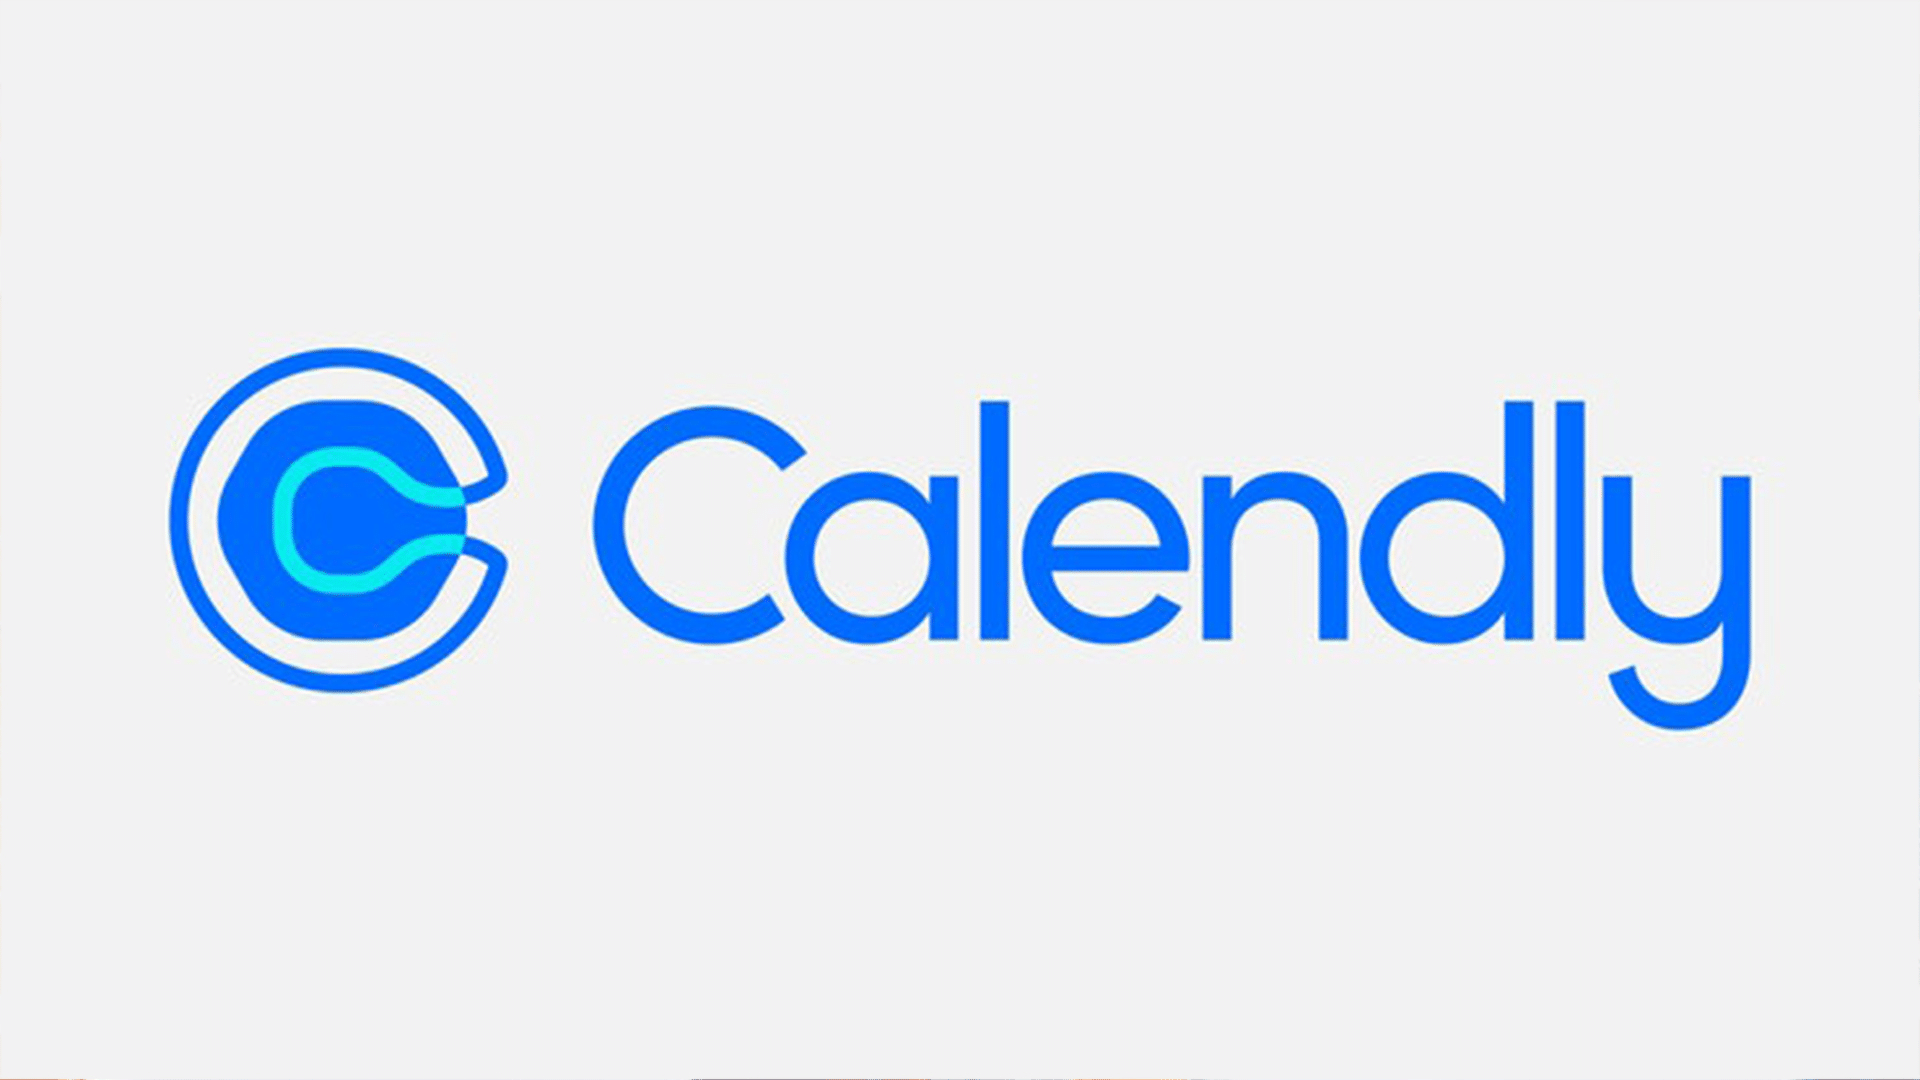 Calendly Review